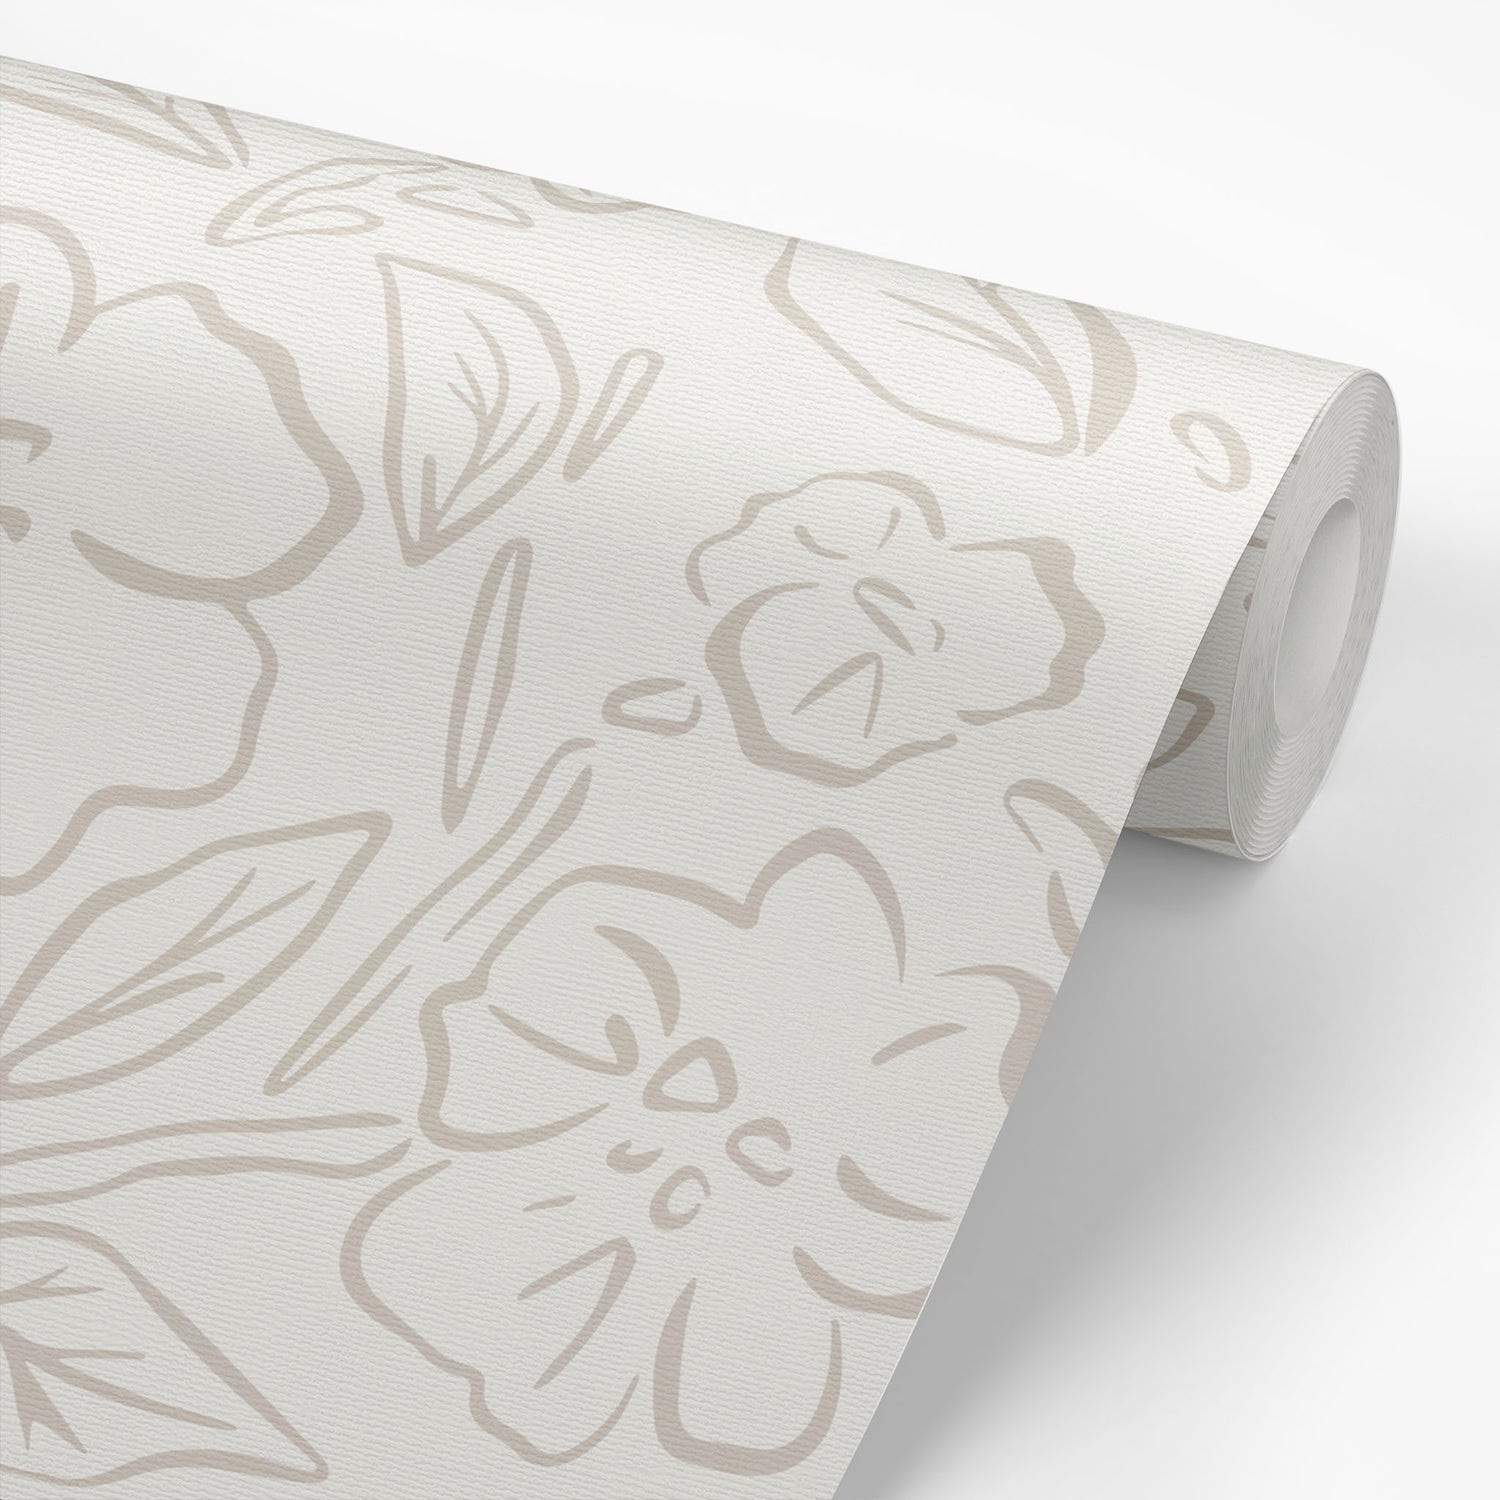 This Beverly Wallpaper in nude offers a stylish and feminine touch with its delicate floral design shown on a wallpaper roll.